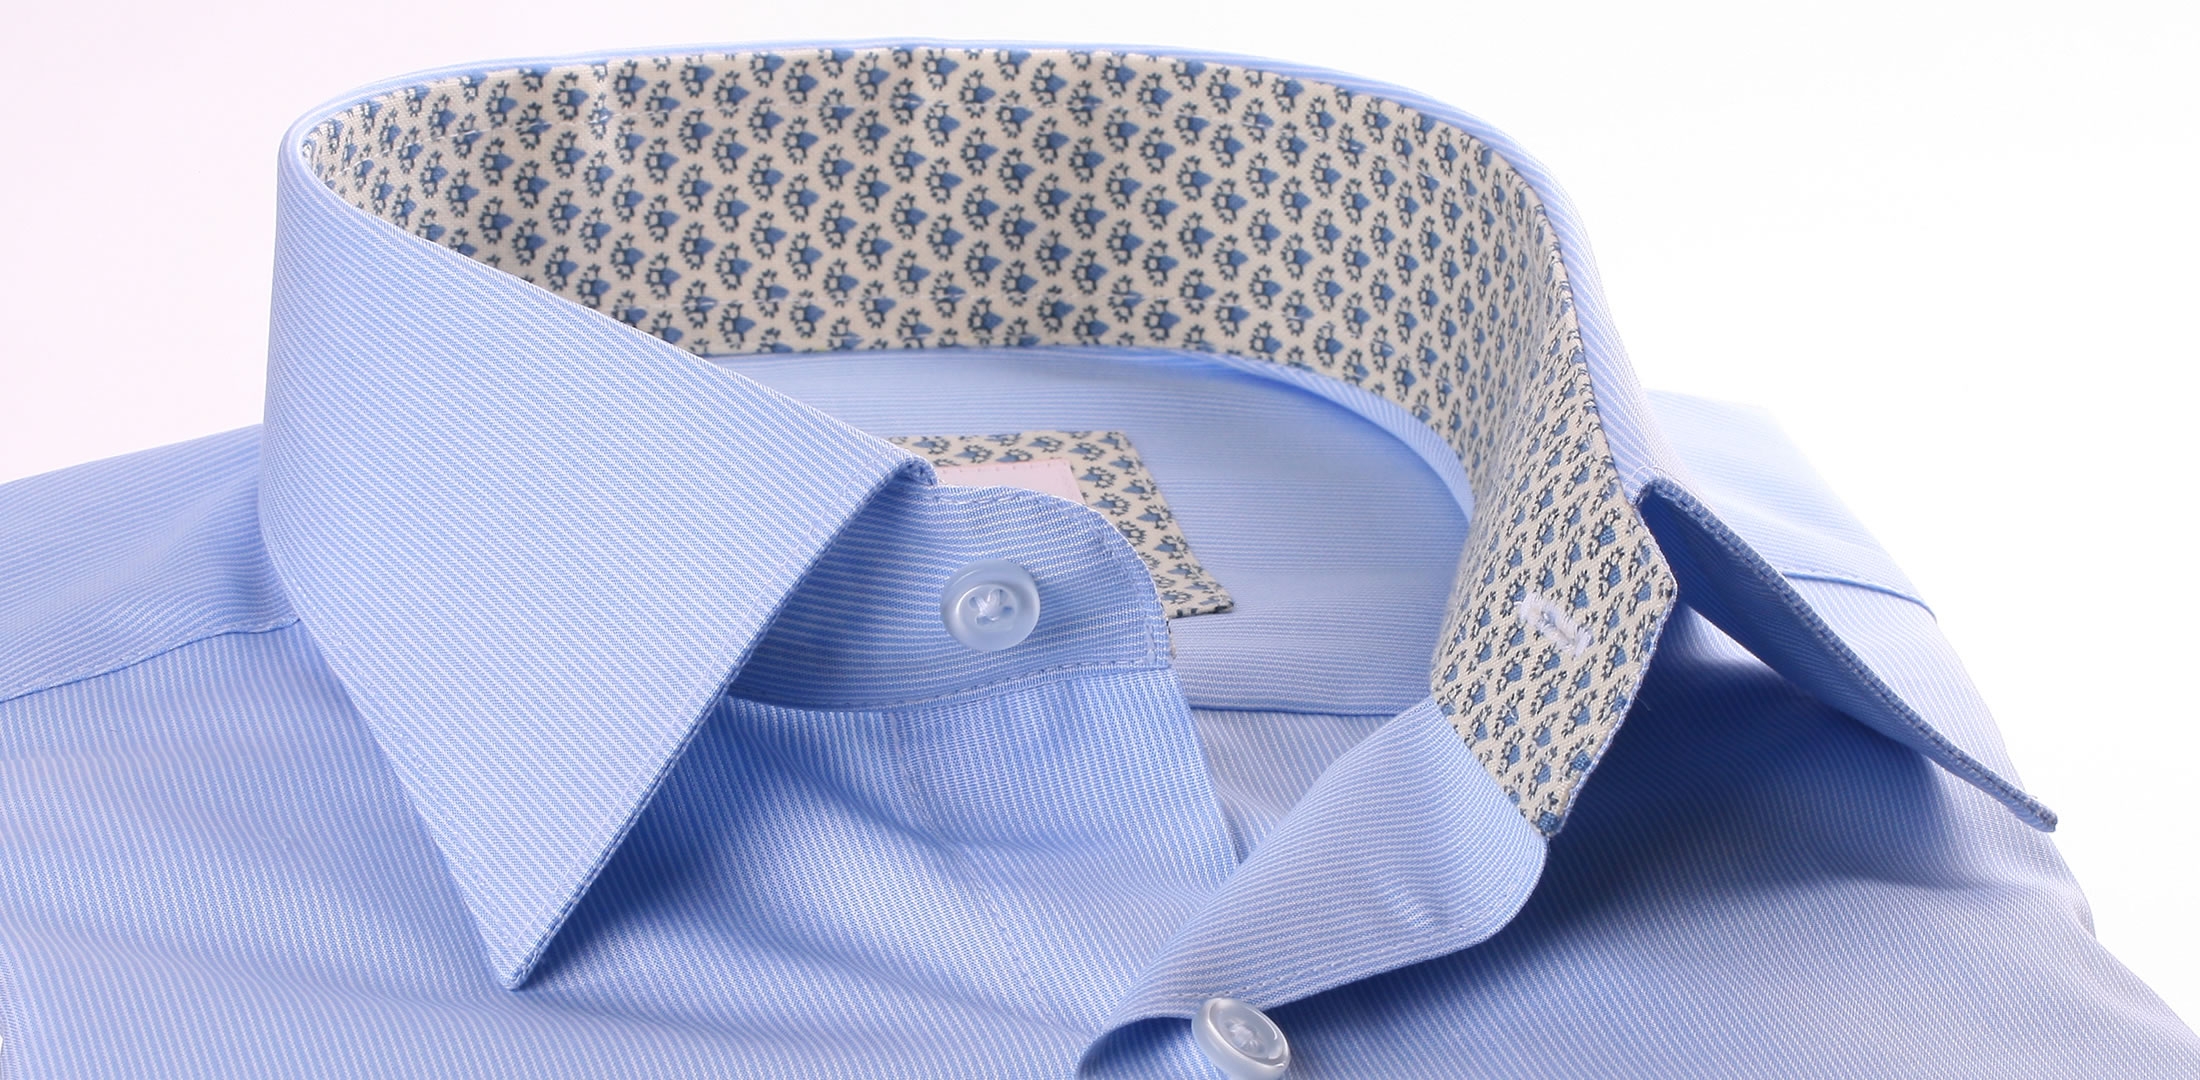 Light blue french cuff shirt with light blue pattern collar and cuffs